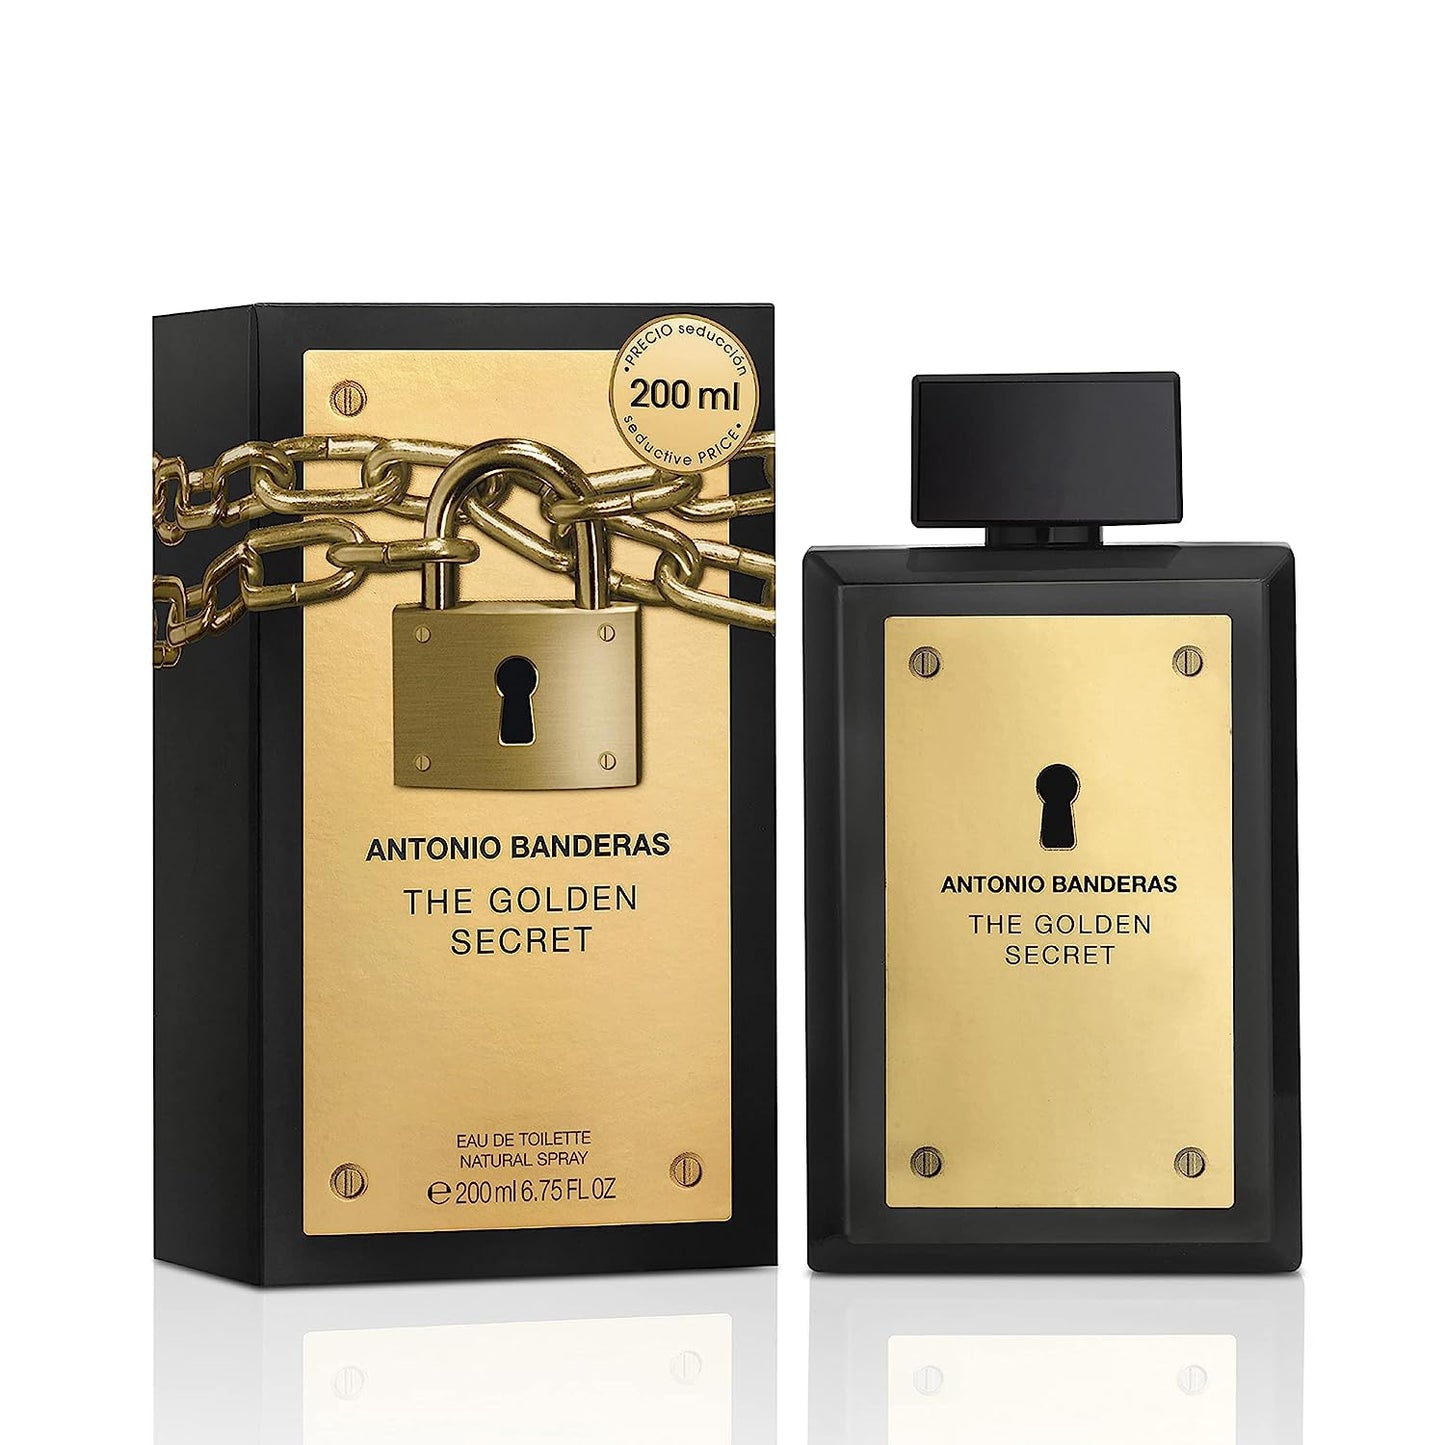 Antonio Banderas Perfumes - The Golden Secret - Eau de Toilette Spray for Men - Long Lasting - Masculine, Casual and Elegant Fragrance - Mint, Apple and Spicy Notes - Ideal for Day Wear - 6.7 Fl Oz